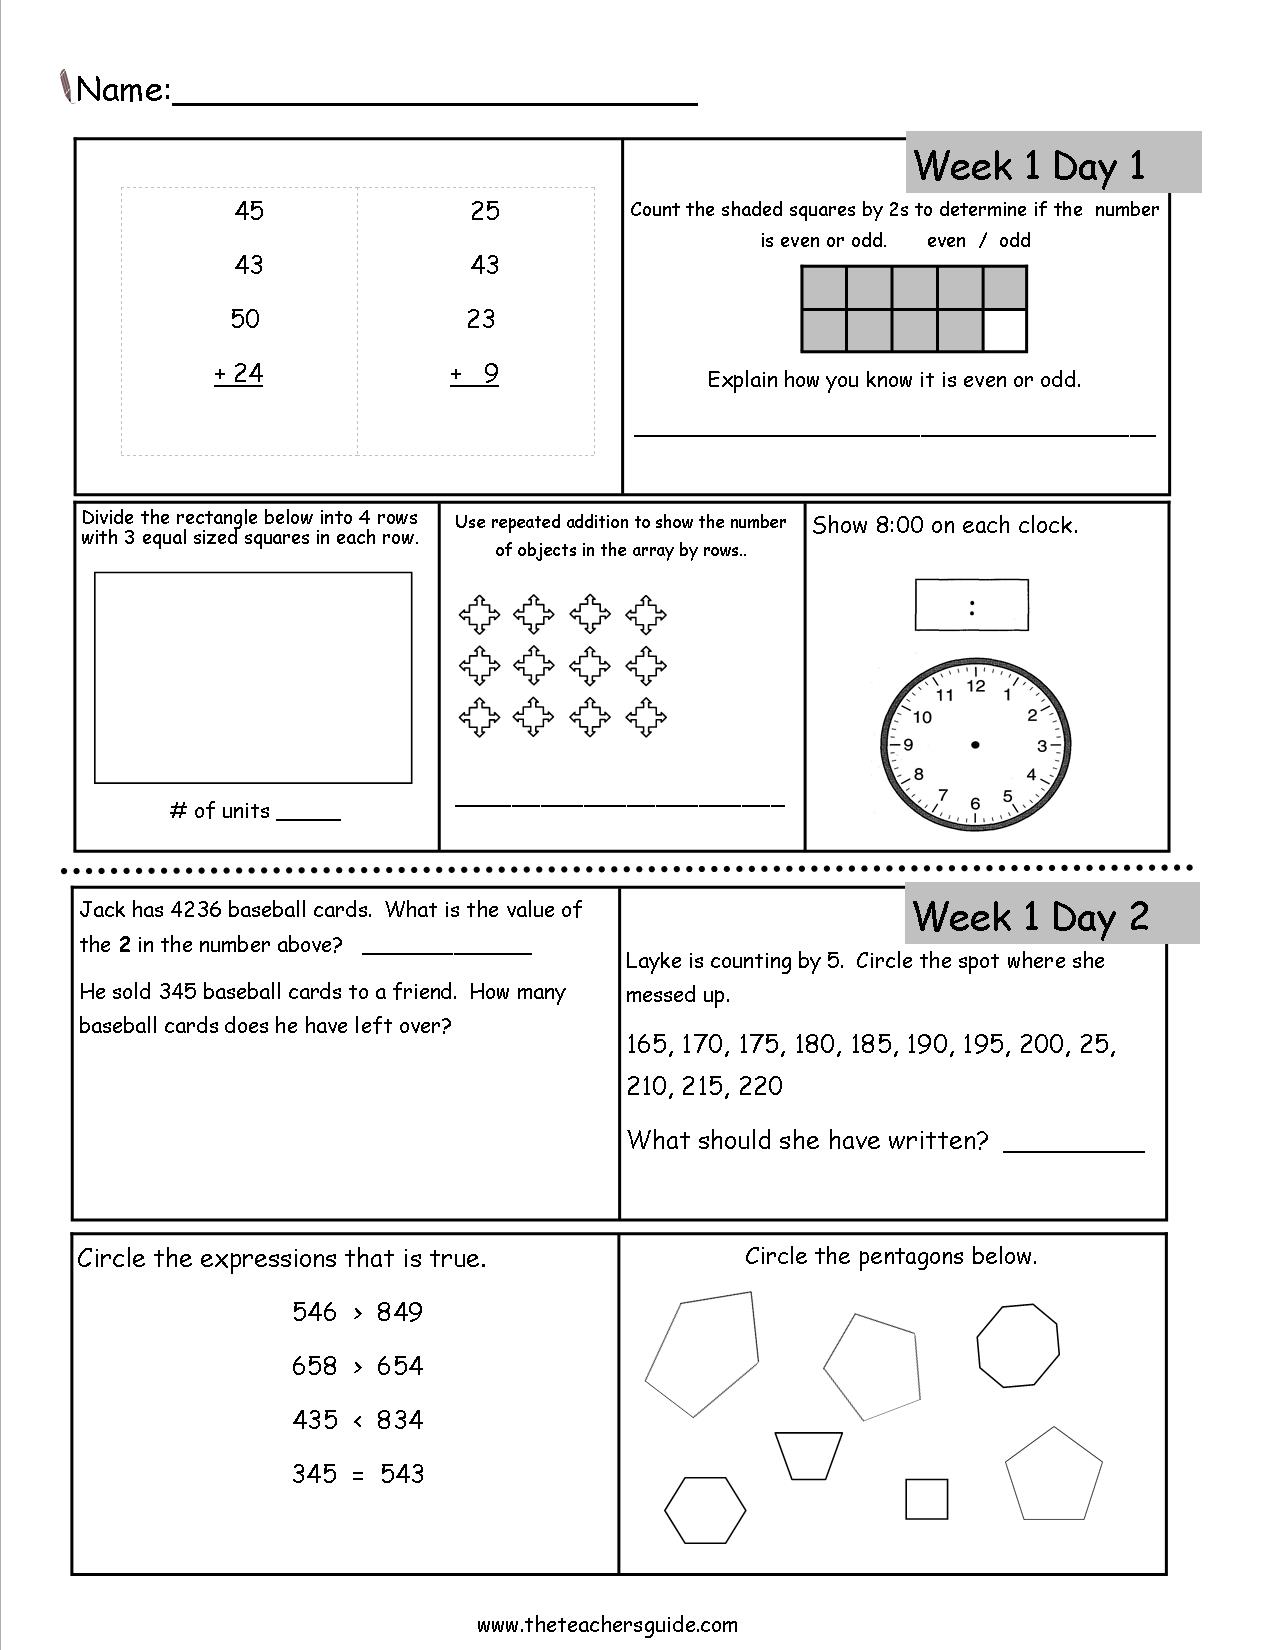 homework-sheets-for-3rd-grade-math-hot-sex-picture